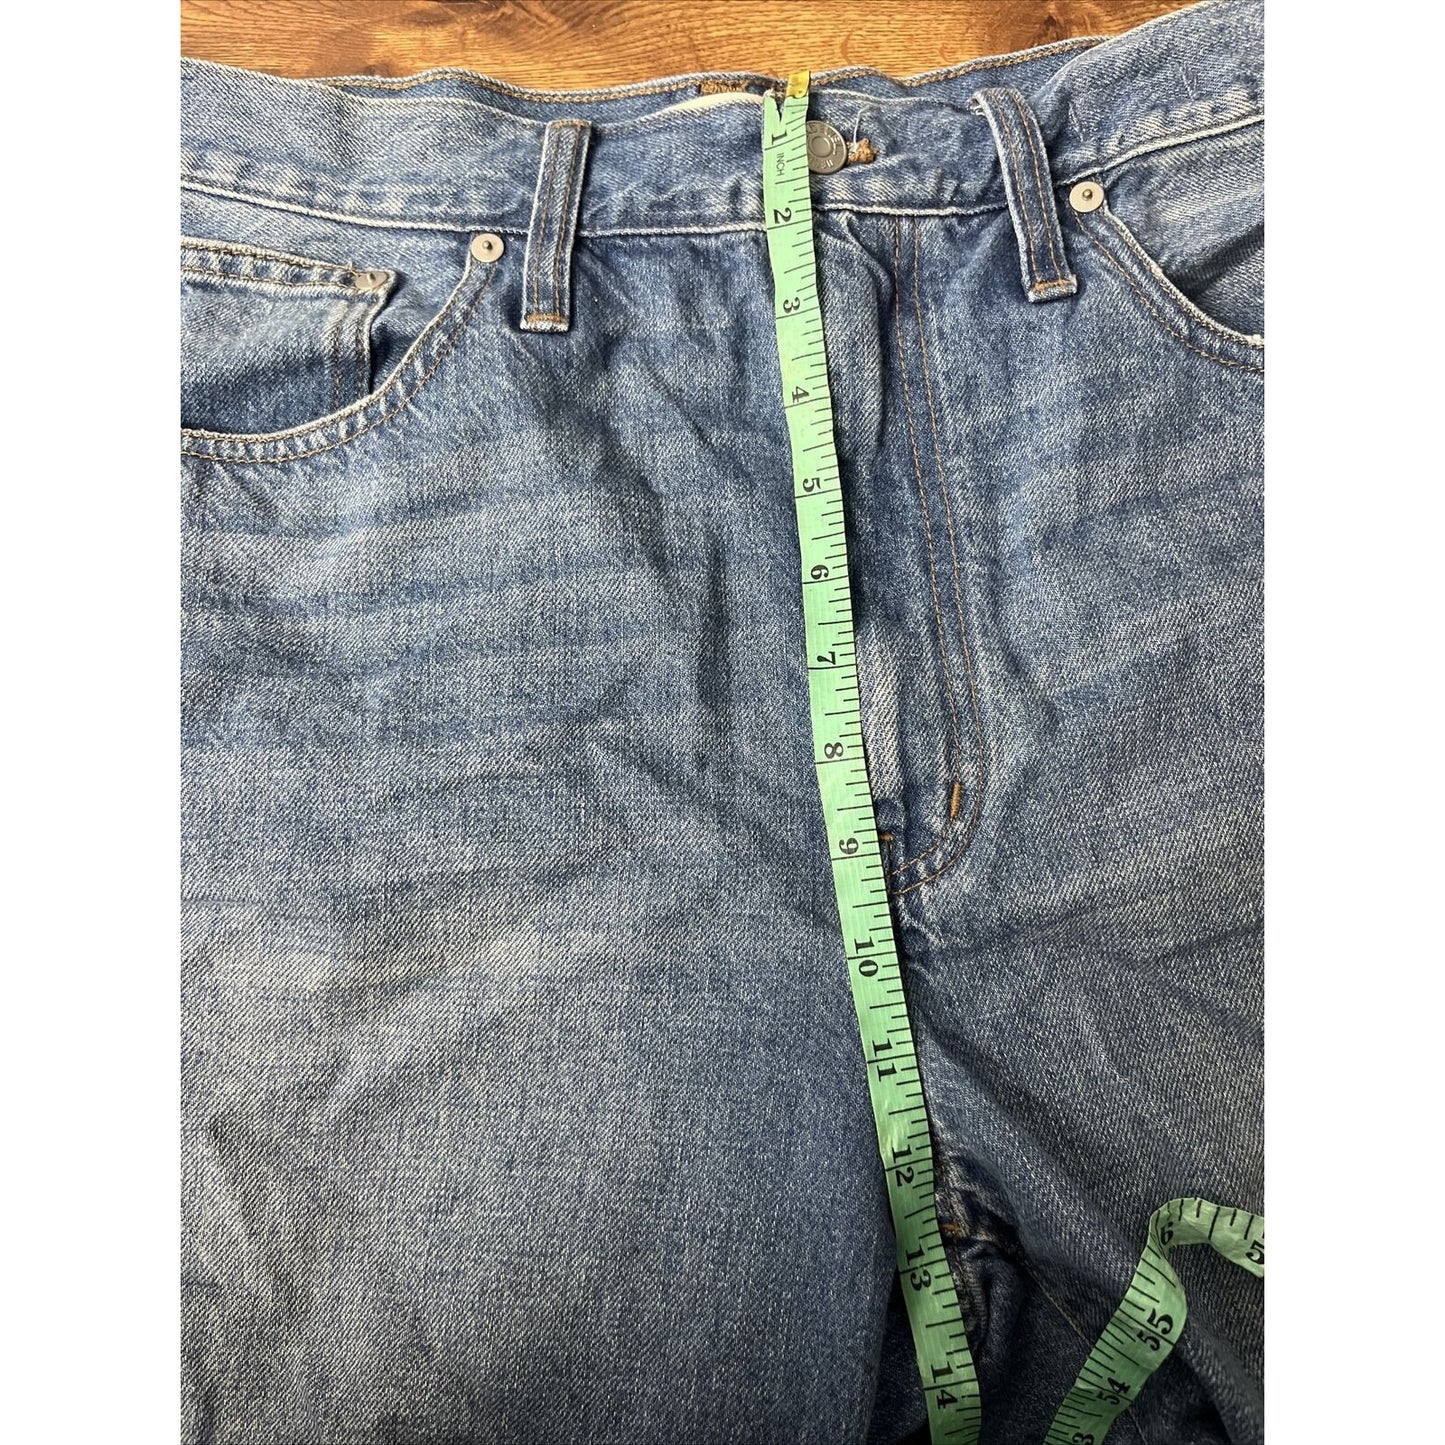 MADEWELL The Perfect Vintage Straight High Waist Jeans in Moultrie Wash Size 31